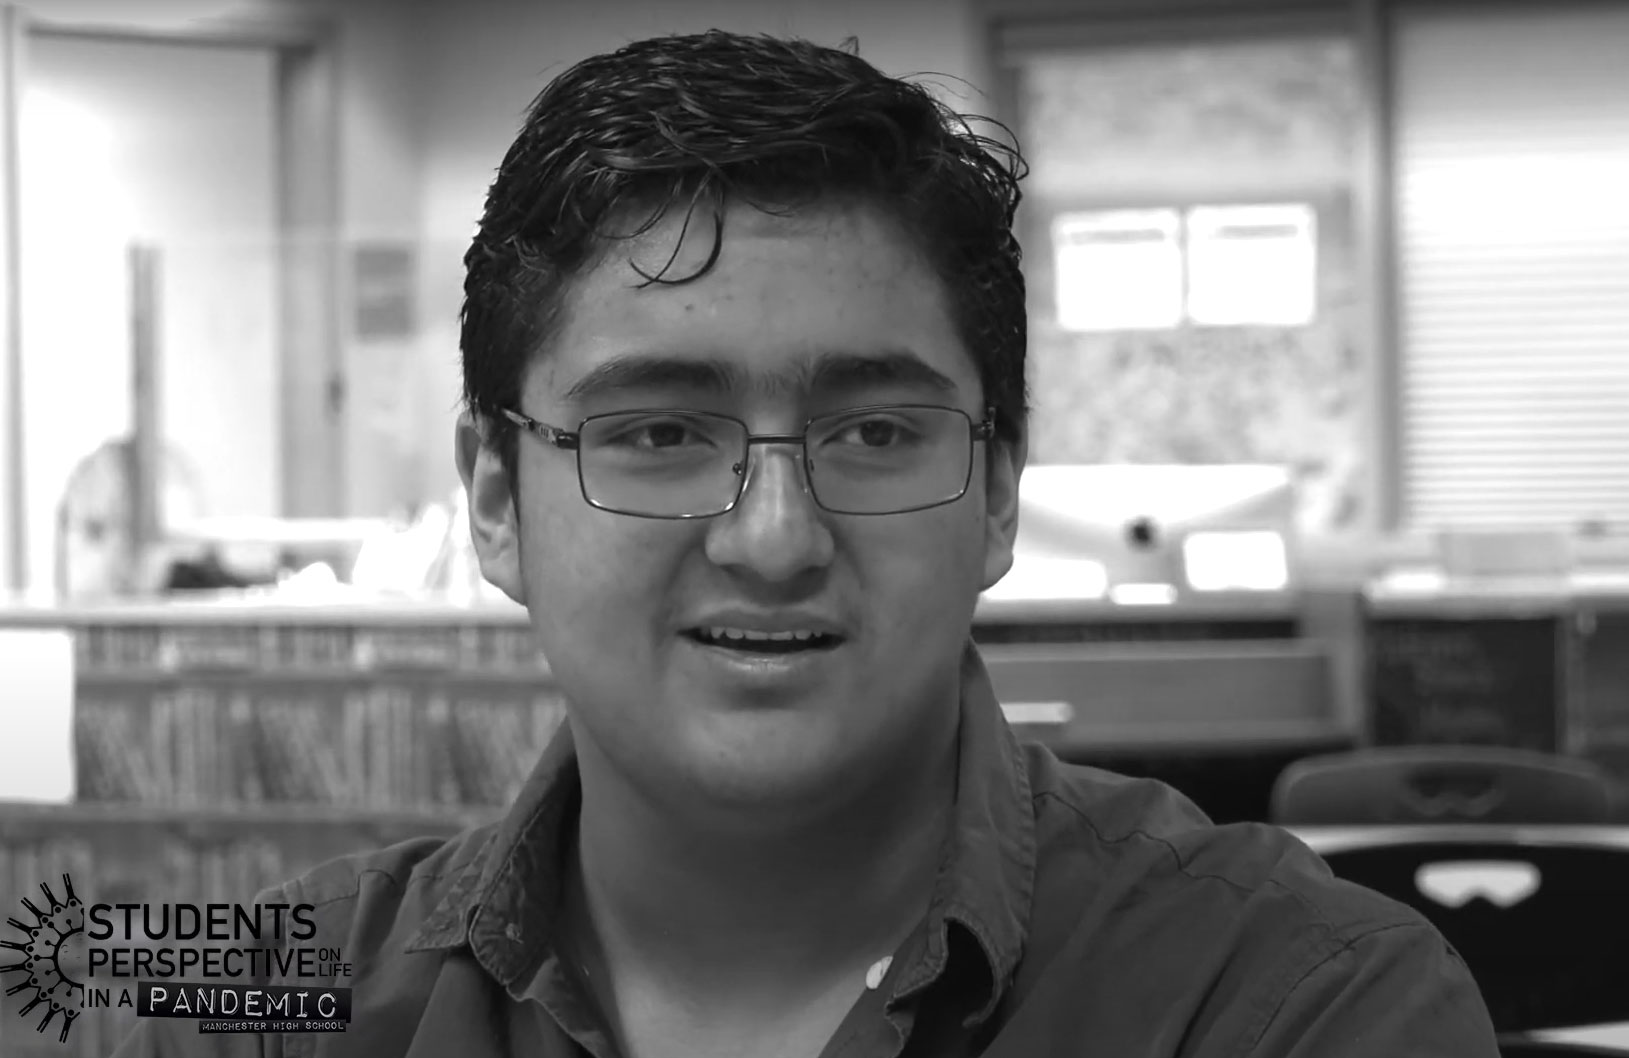 A young man with short, black hair and wire frame glasses sits in a library setting and is interviewed.